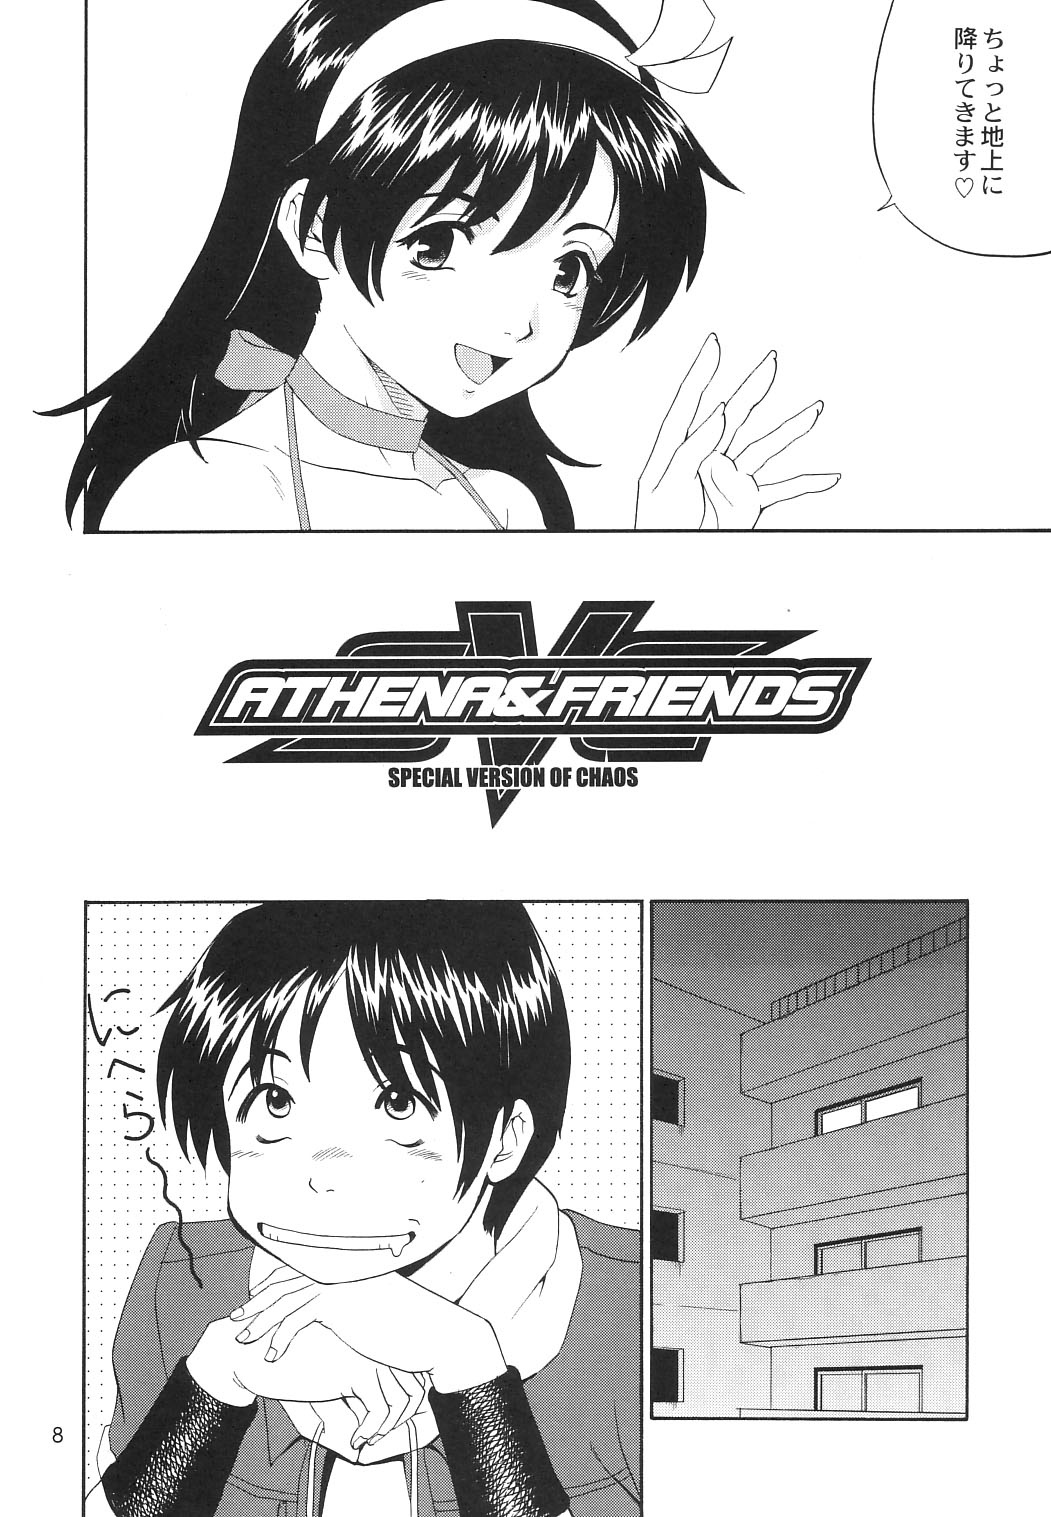 (C65) [Saigado] Athena & Friends SVC -Special Version of Chaos- (King of Fighters) page 7 full